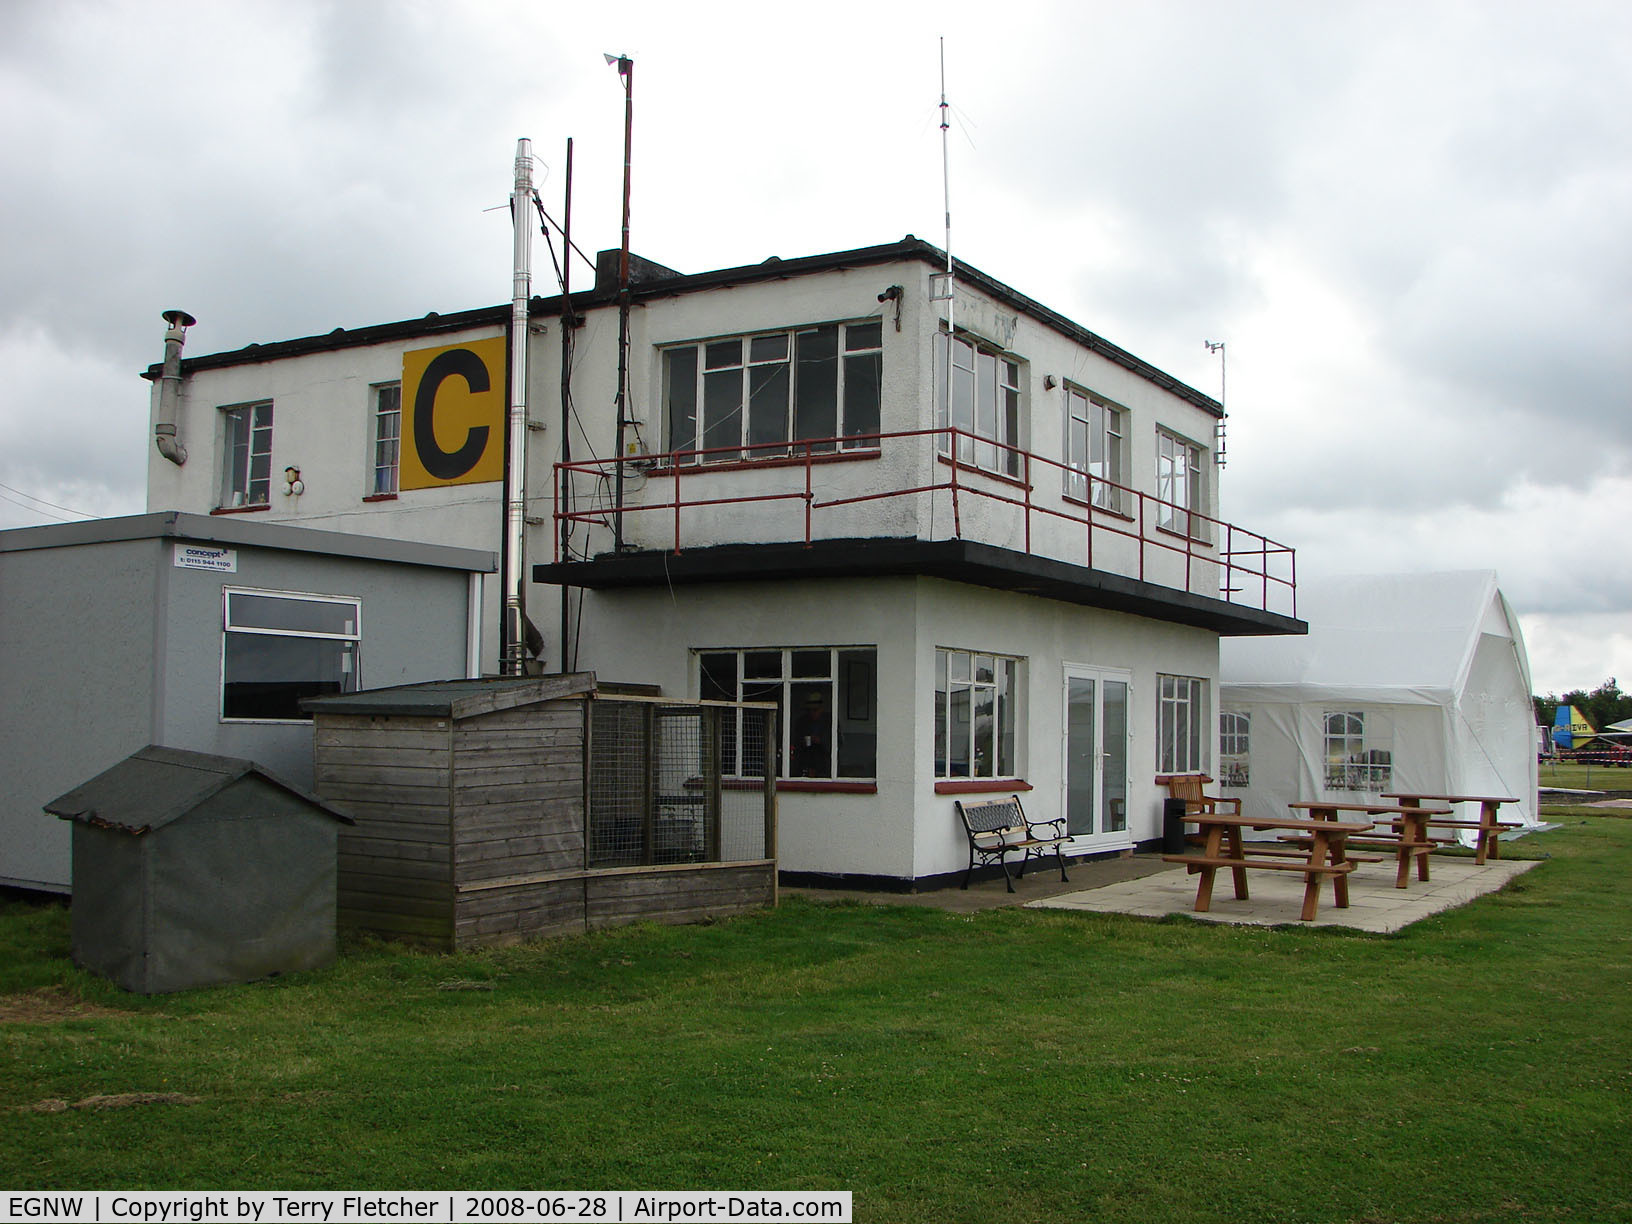 Wickenby Aerodrome Airport, Lincoln, England United Kingdom (EGNW) - Wickenby EGNW Control Tower , Museum and Cafe